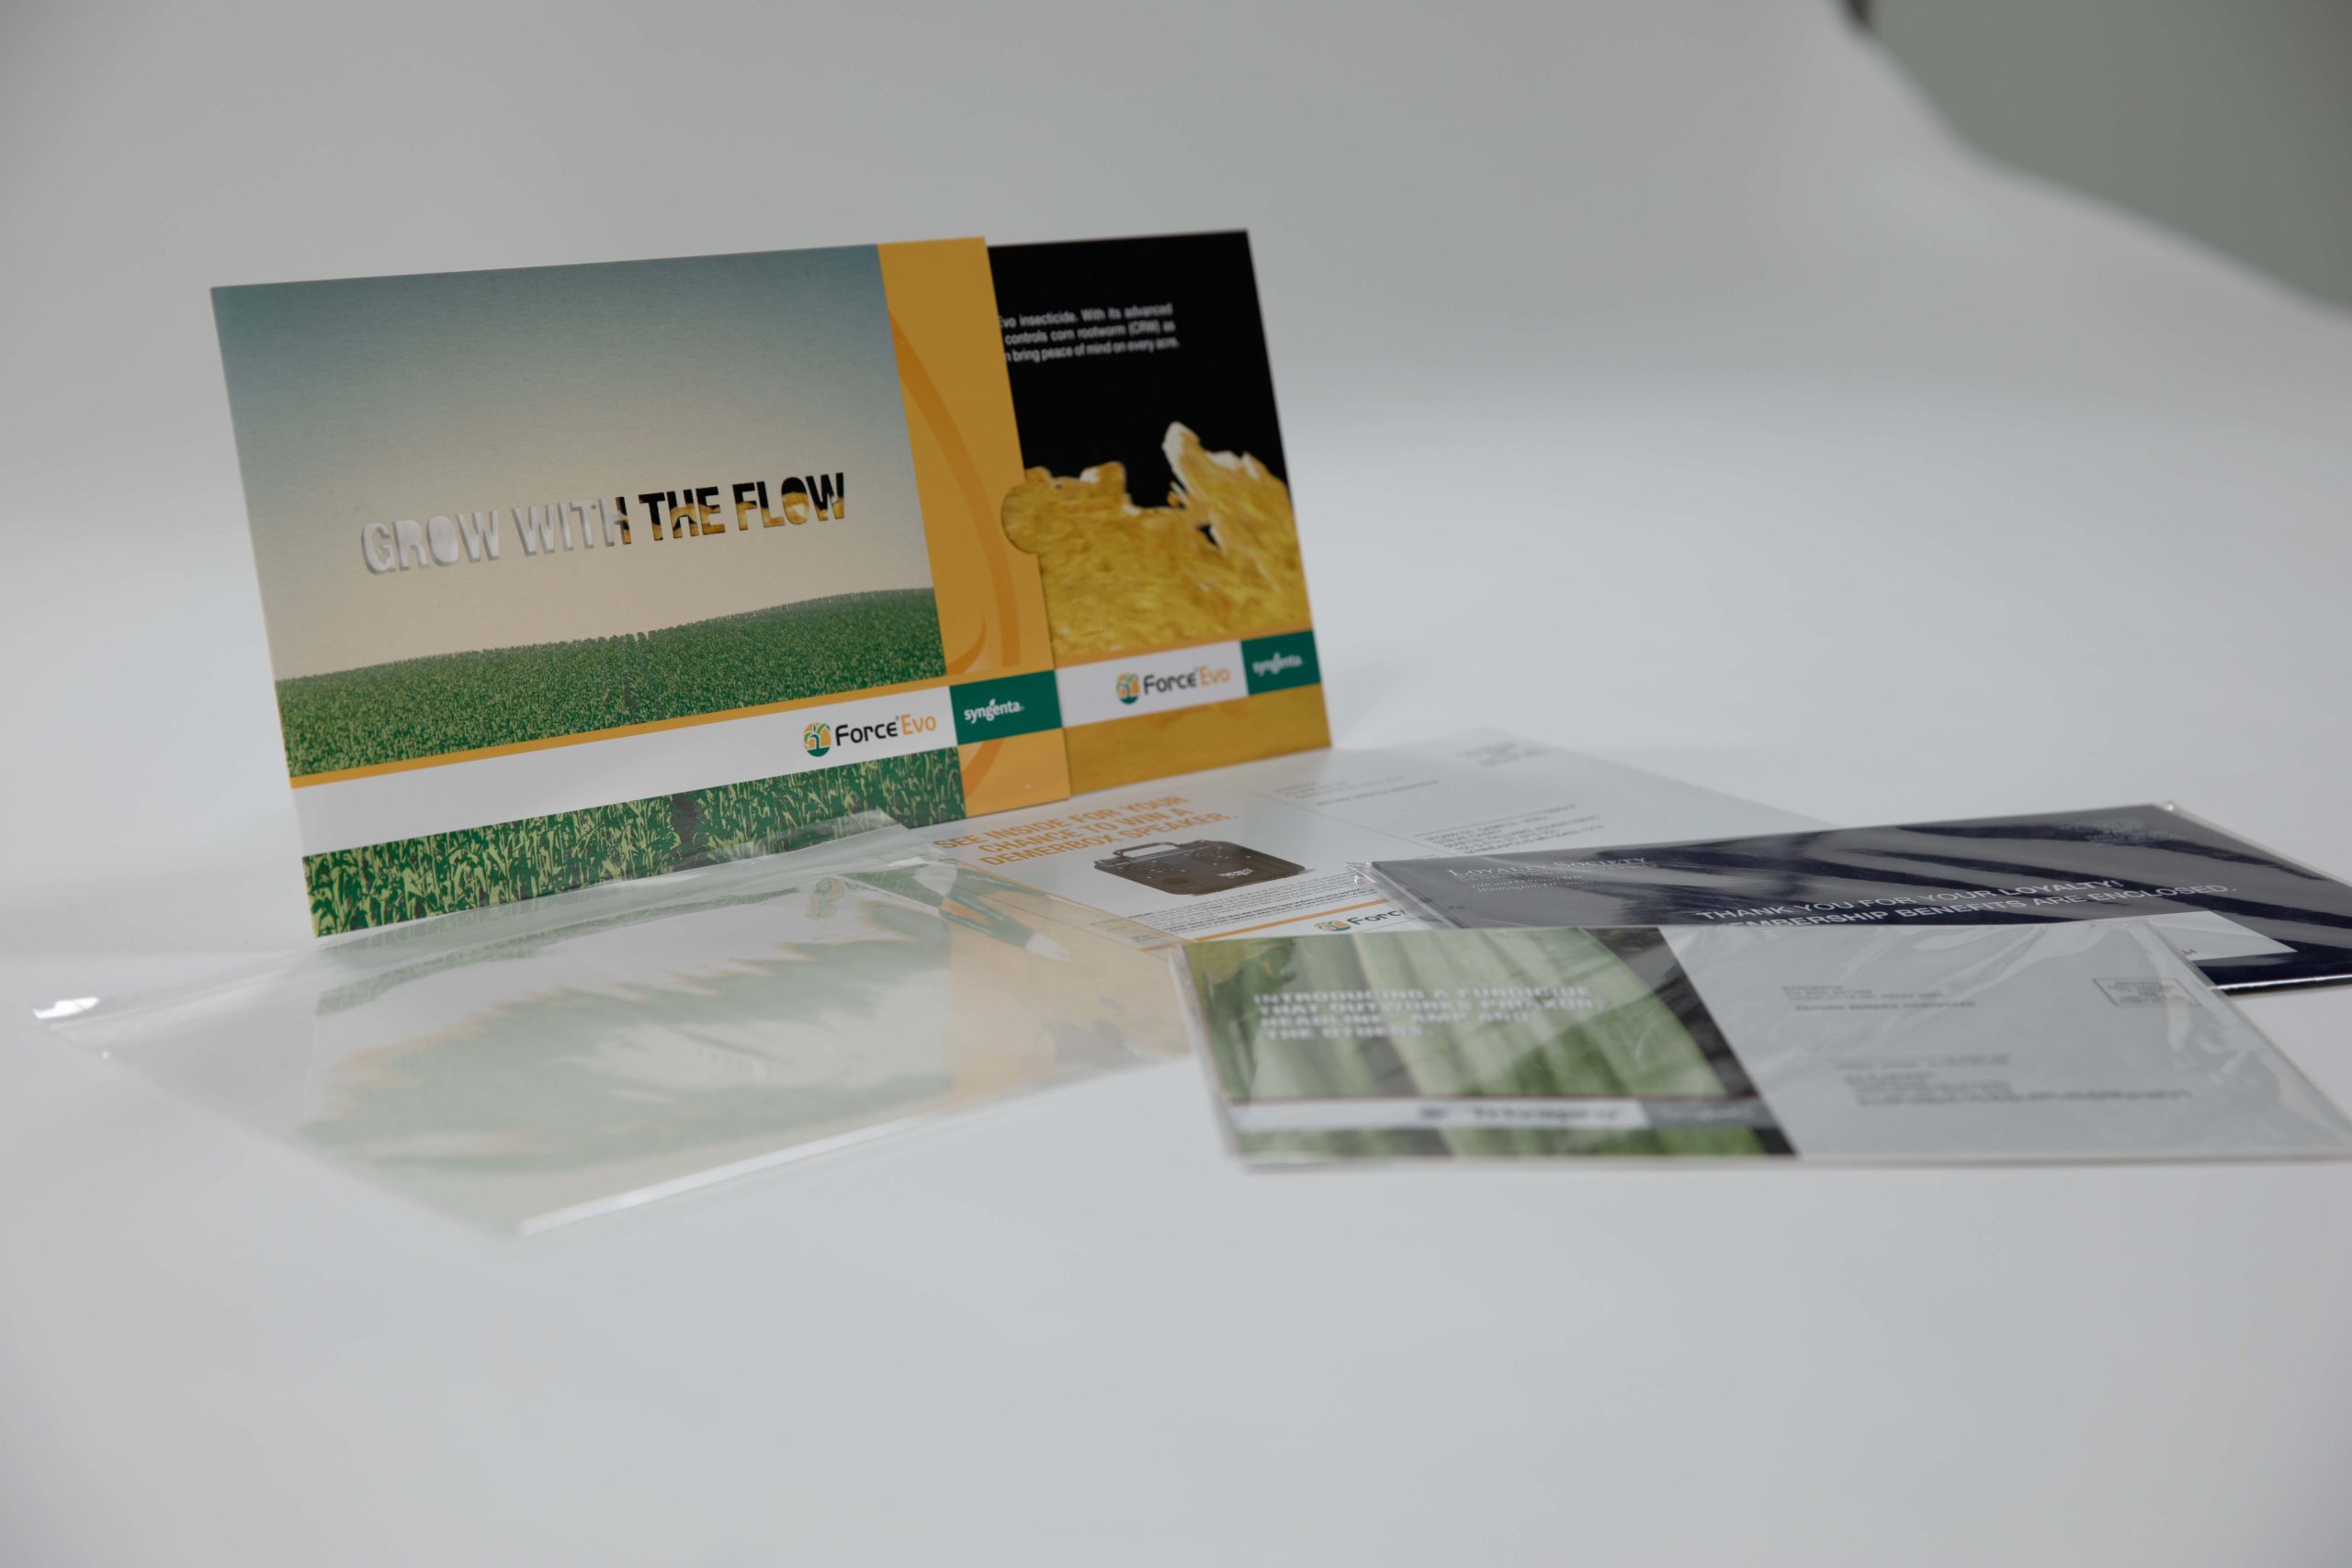 ● Syngenta grow with the flow promotional direct mail